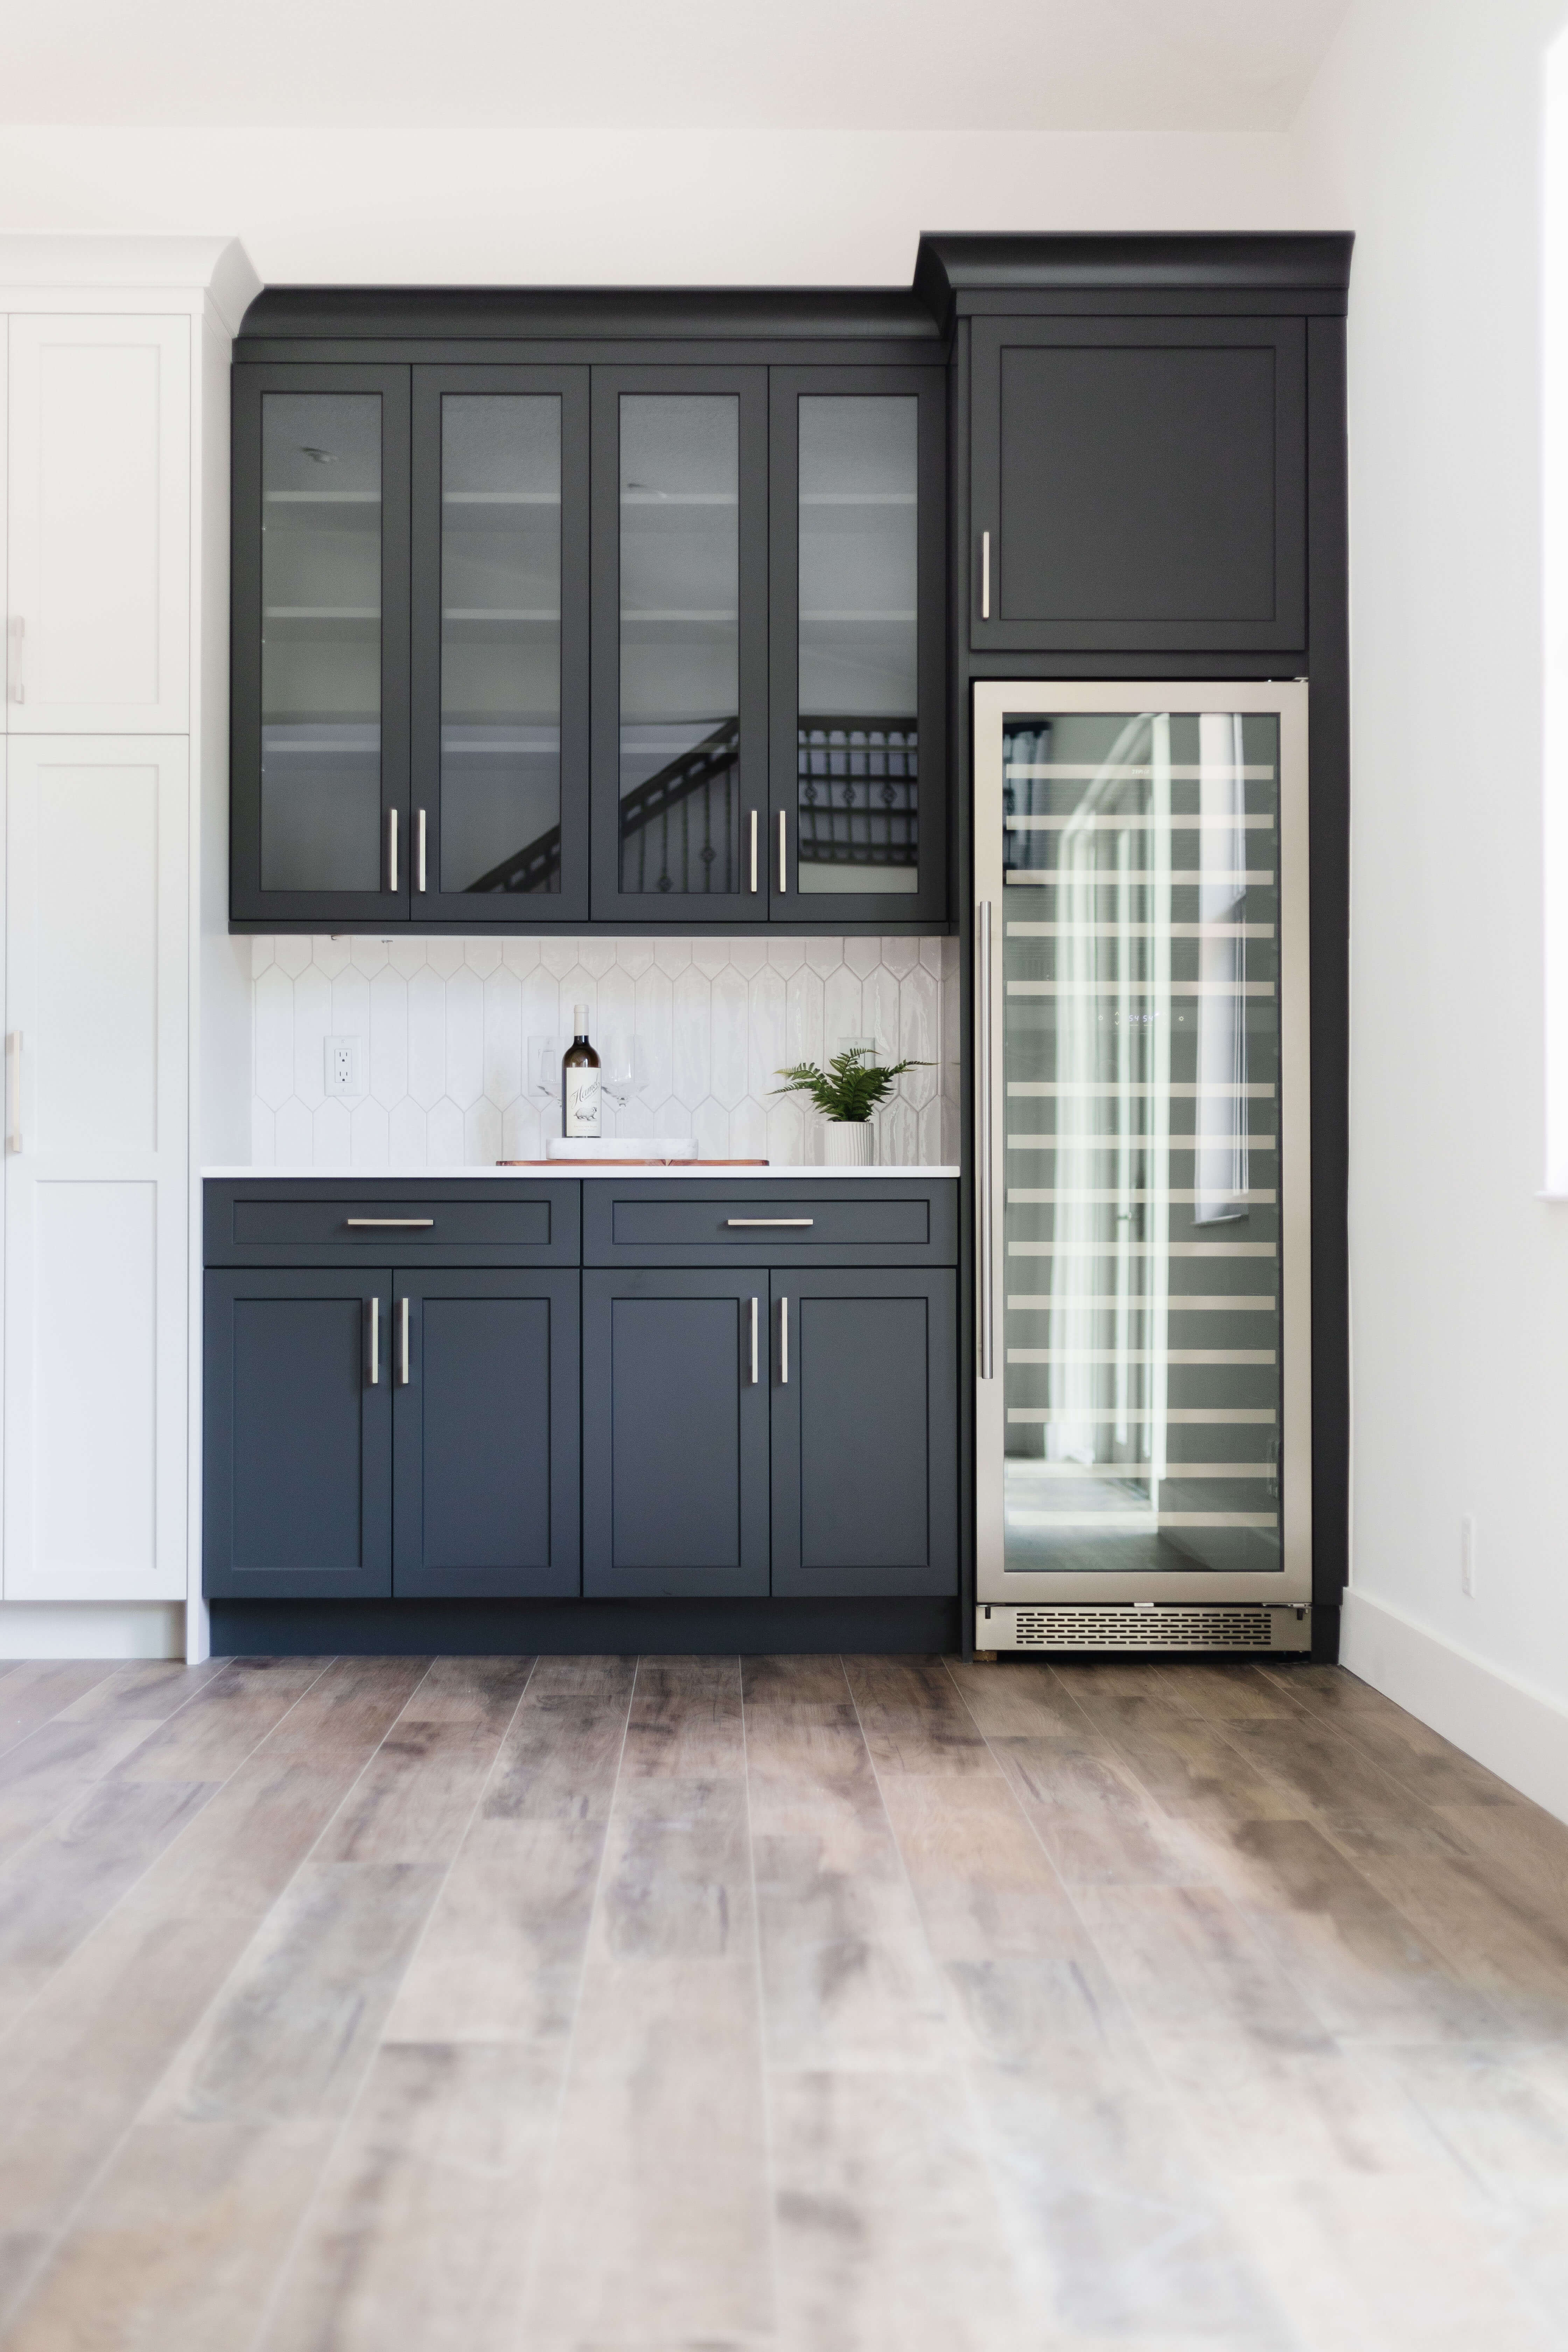 The dark gray, black painted cabinets with a wine & beverage fridge and buffet table space.